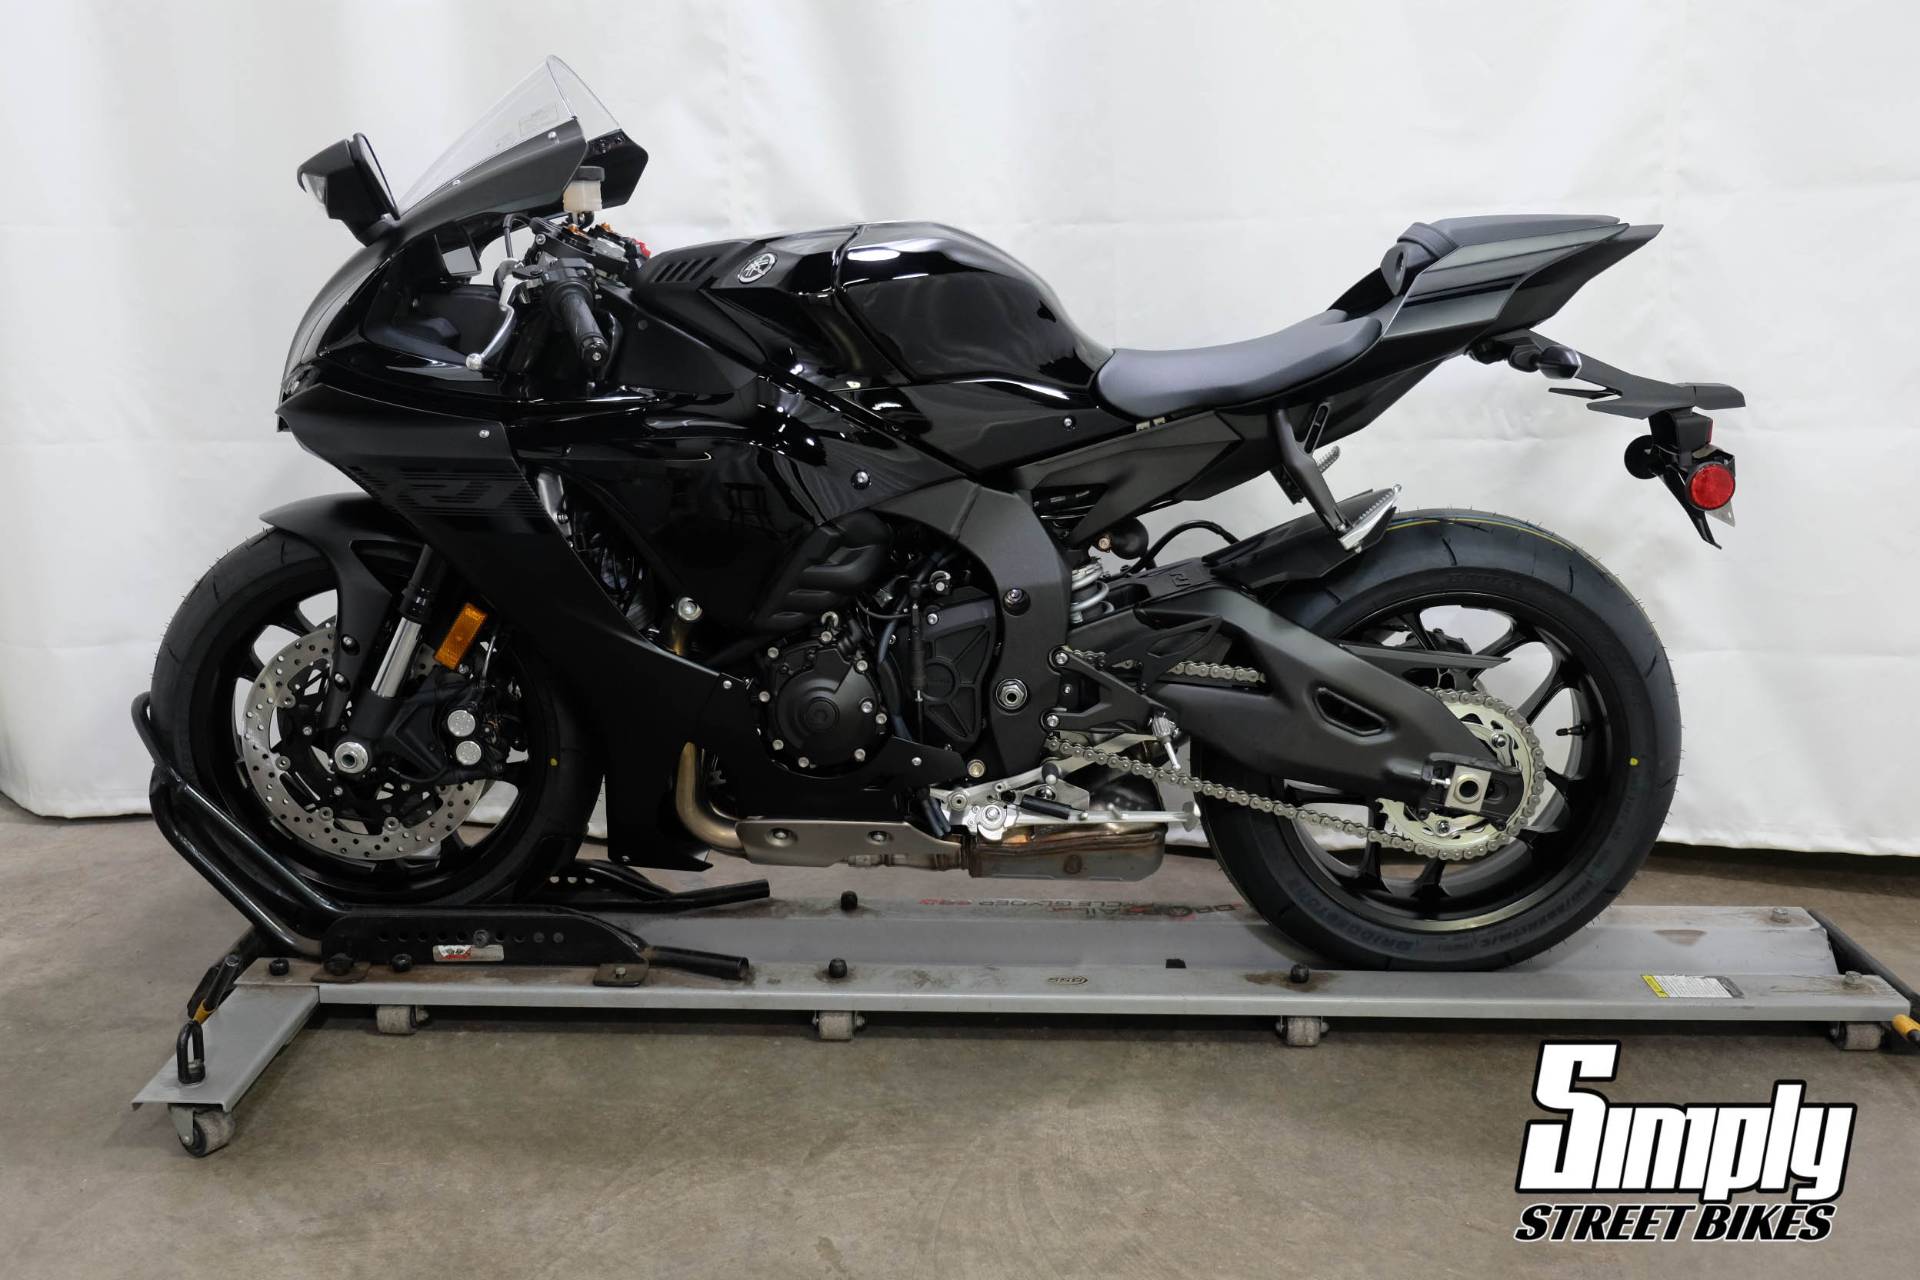 2021 Yamaha YZF-R1 | New Motorcycle For Sale | Eden ...